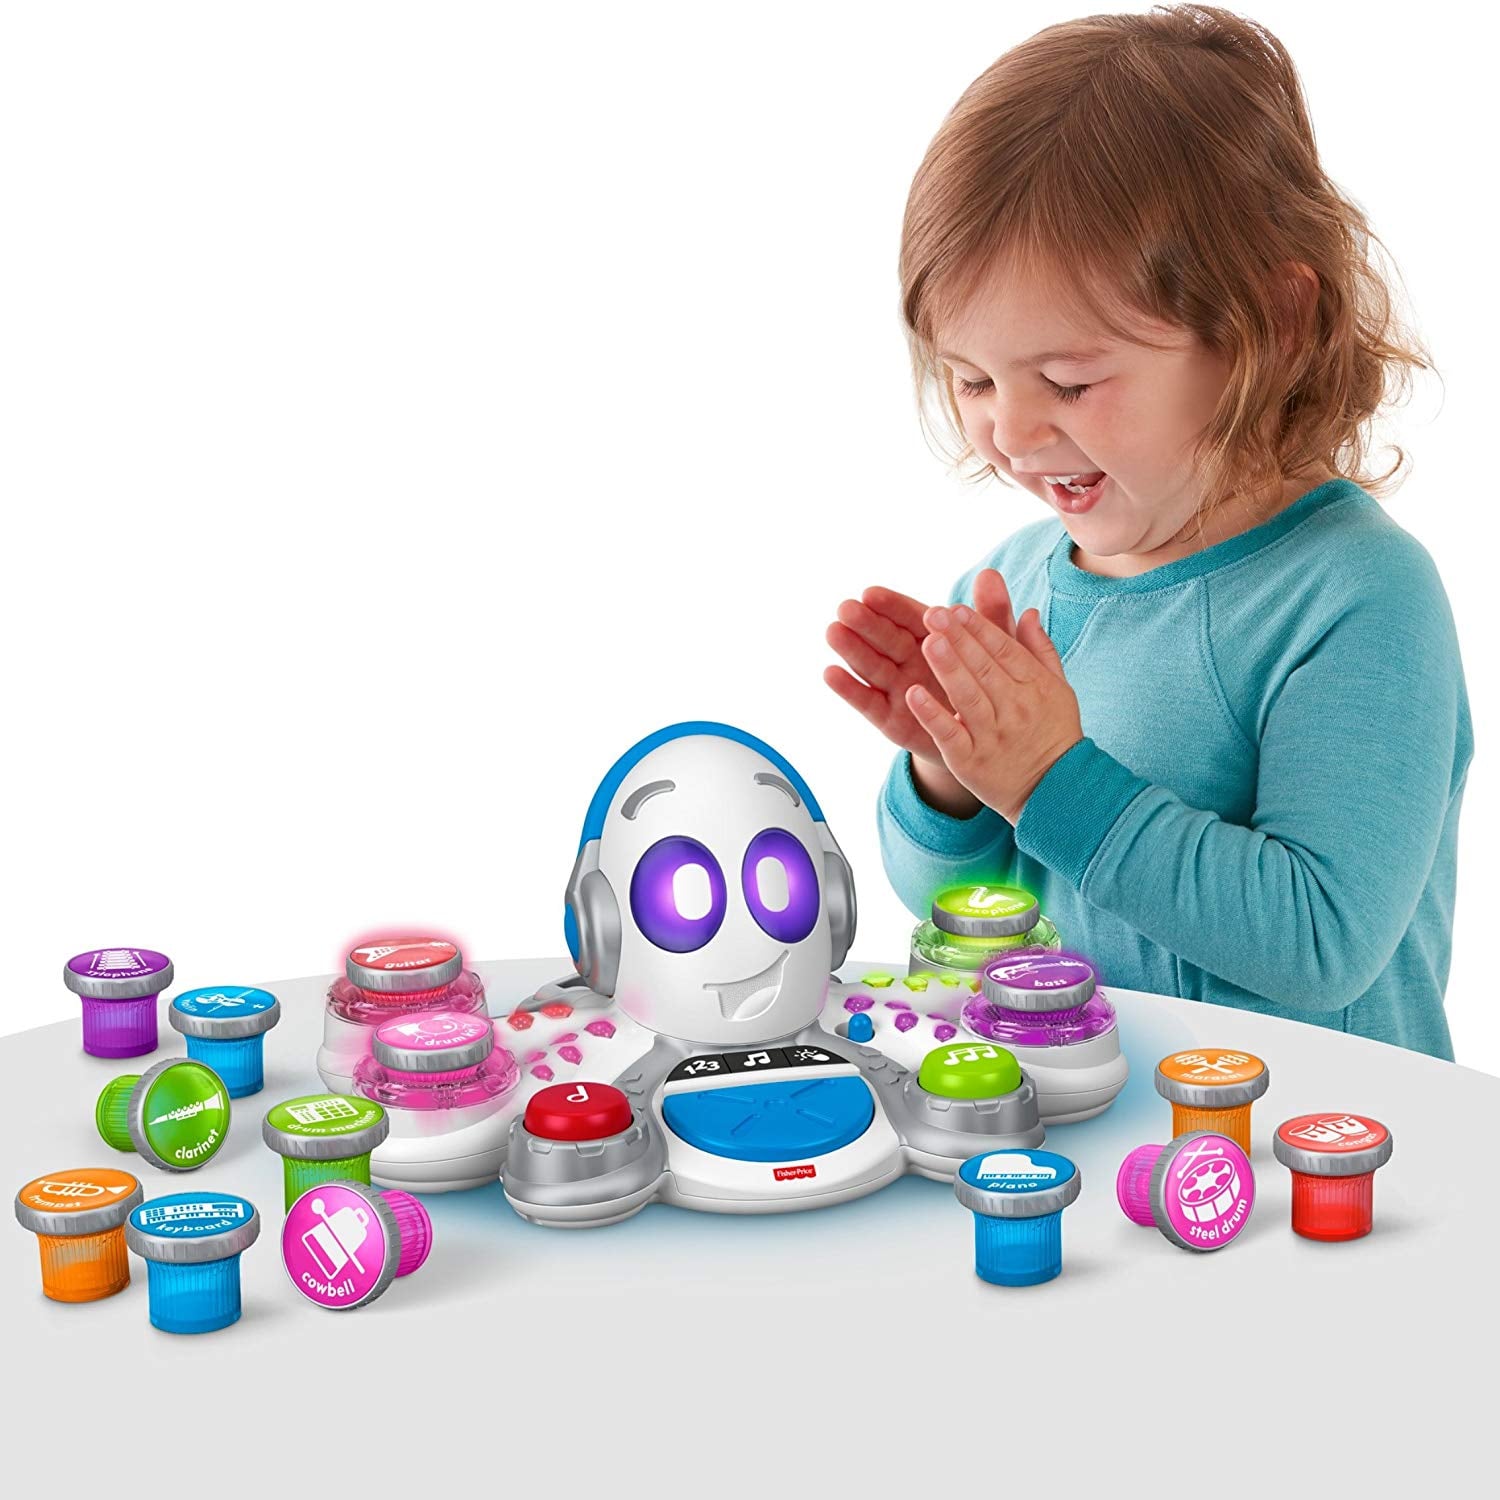 fisher price think and learn rocktopus